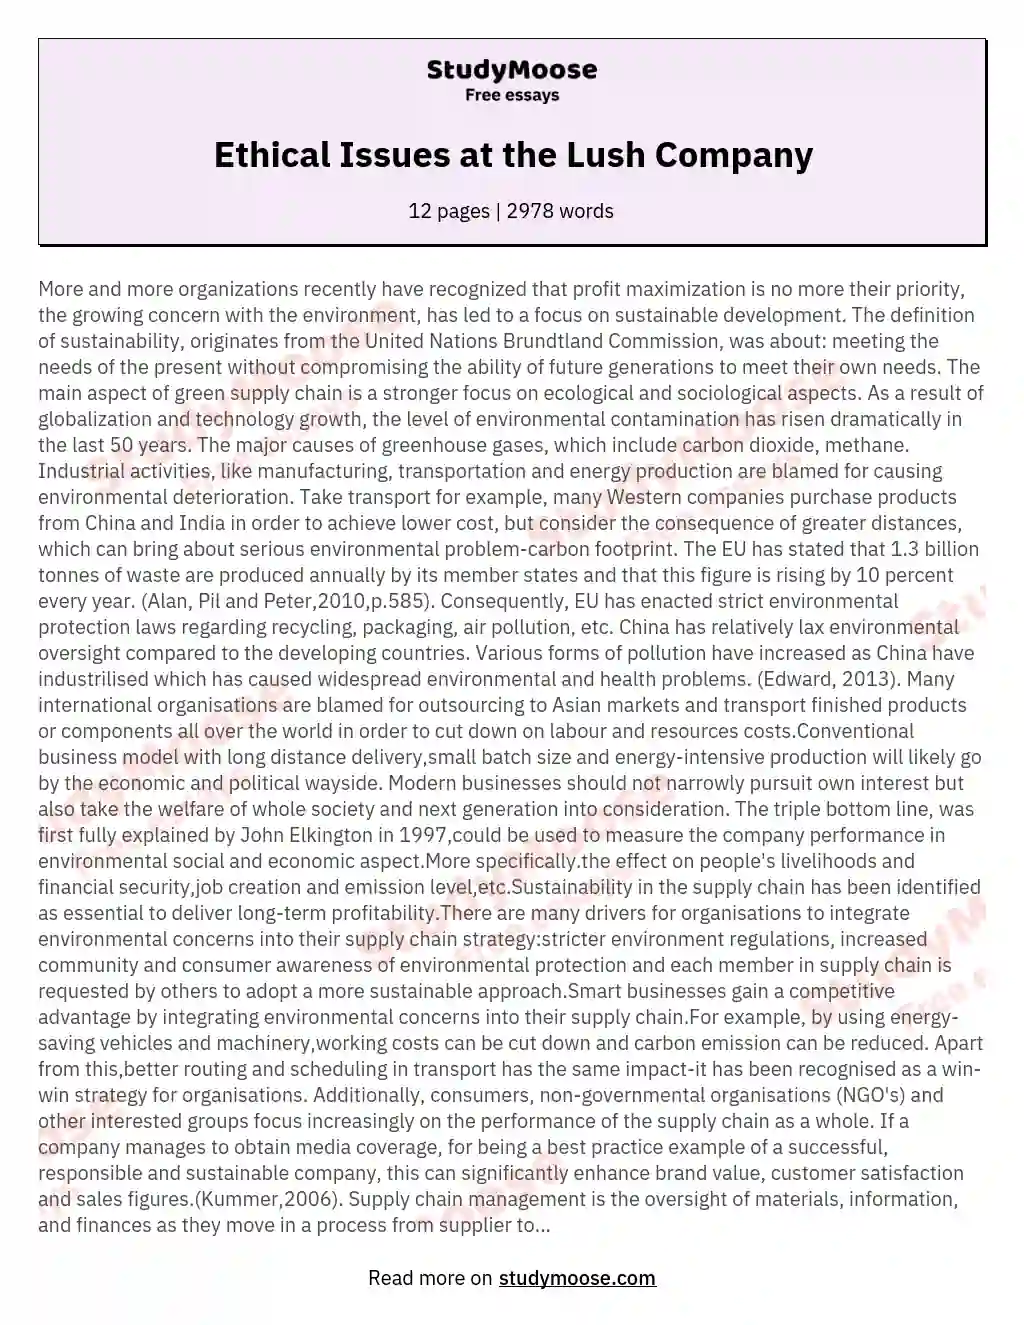 Ethical Issues at the Lush Company essay